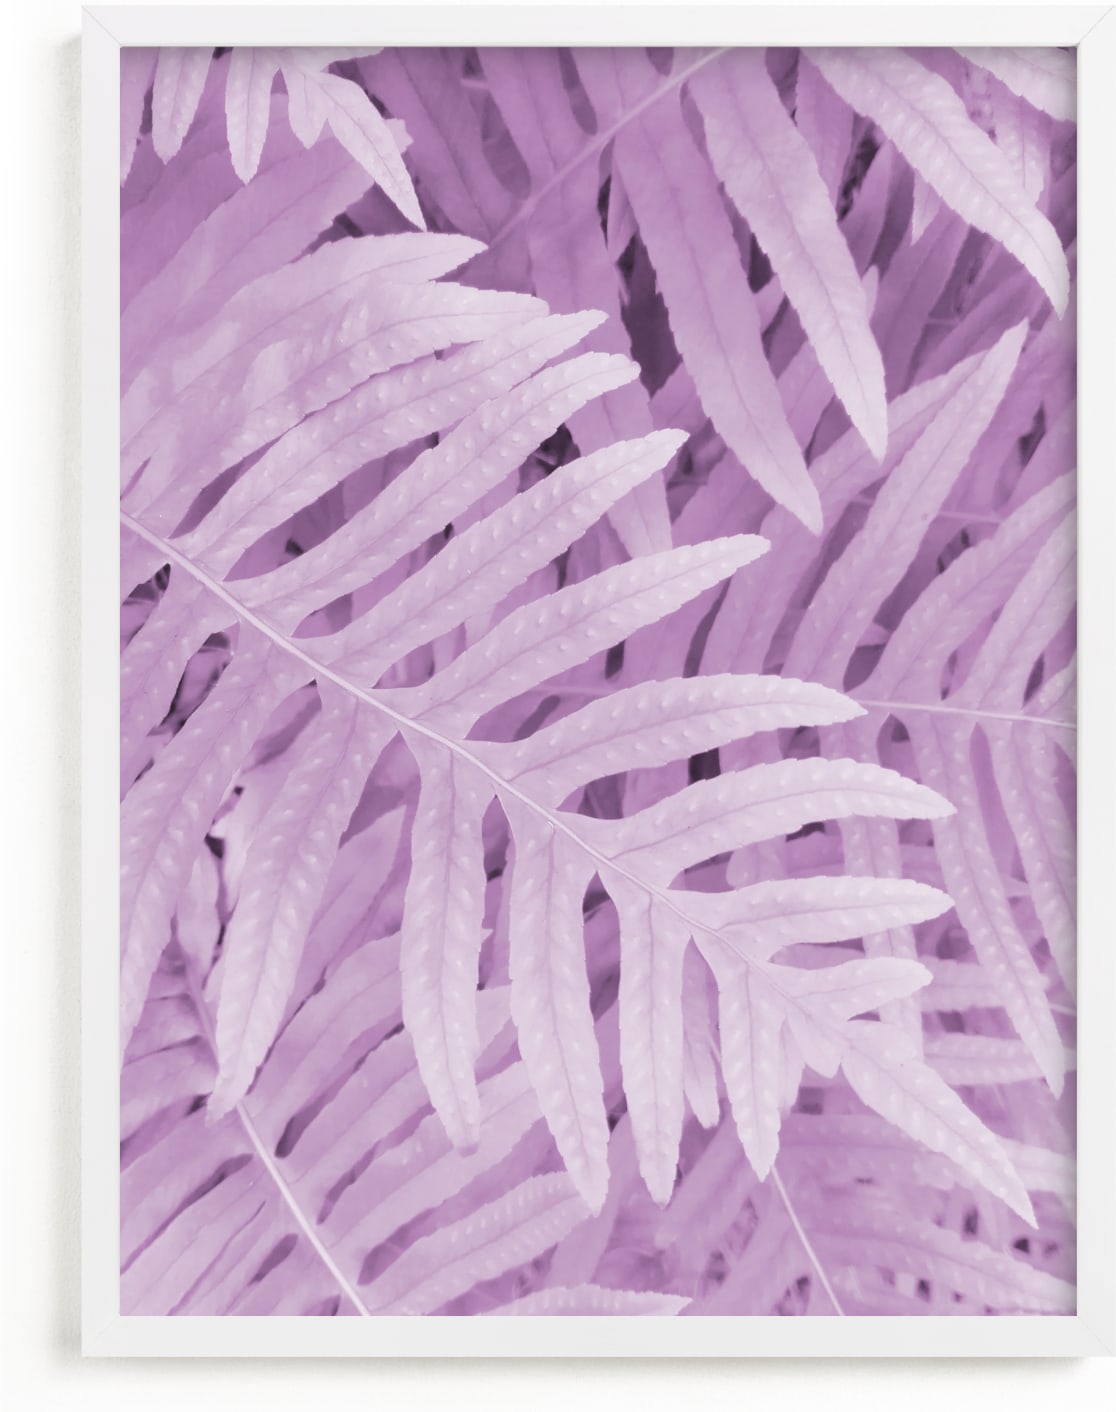 This is a purple art by EMANUELA CARRATONI called Pink Ferns.